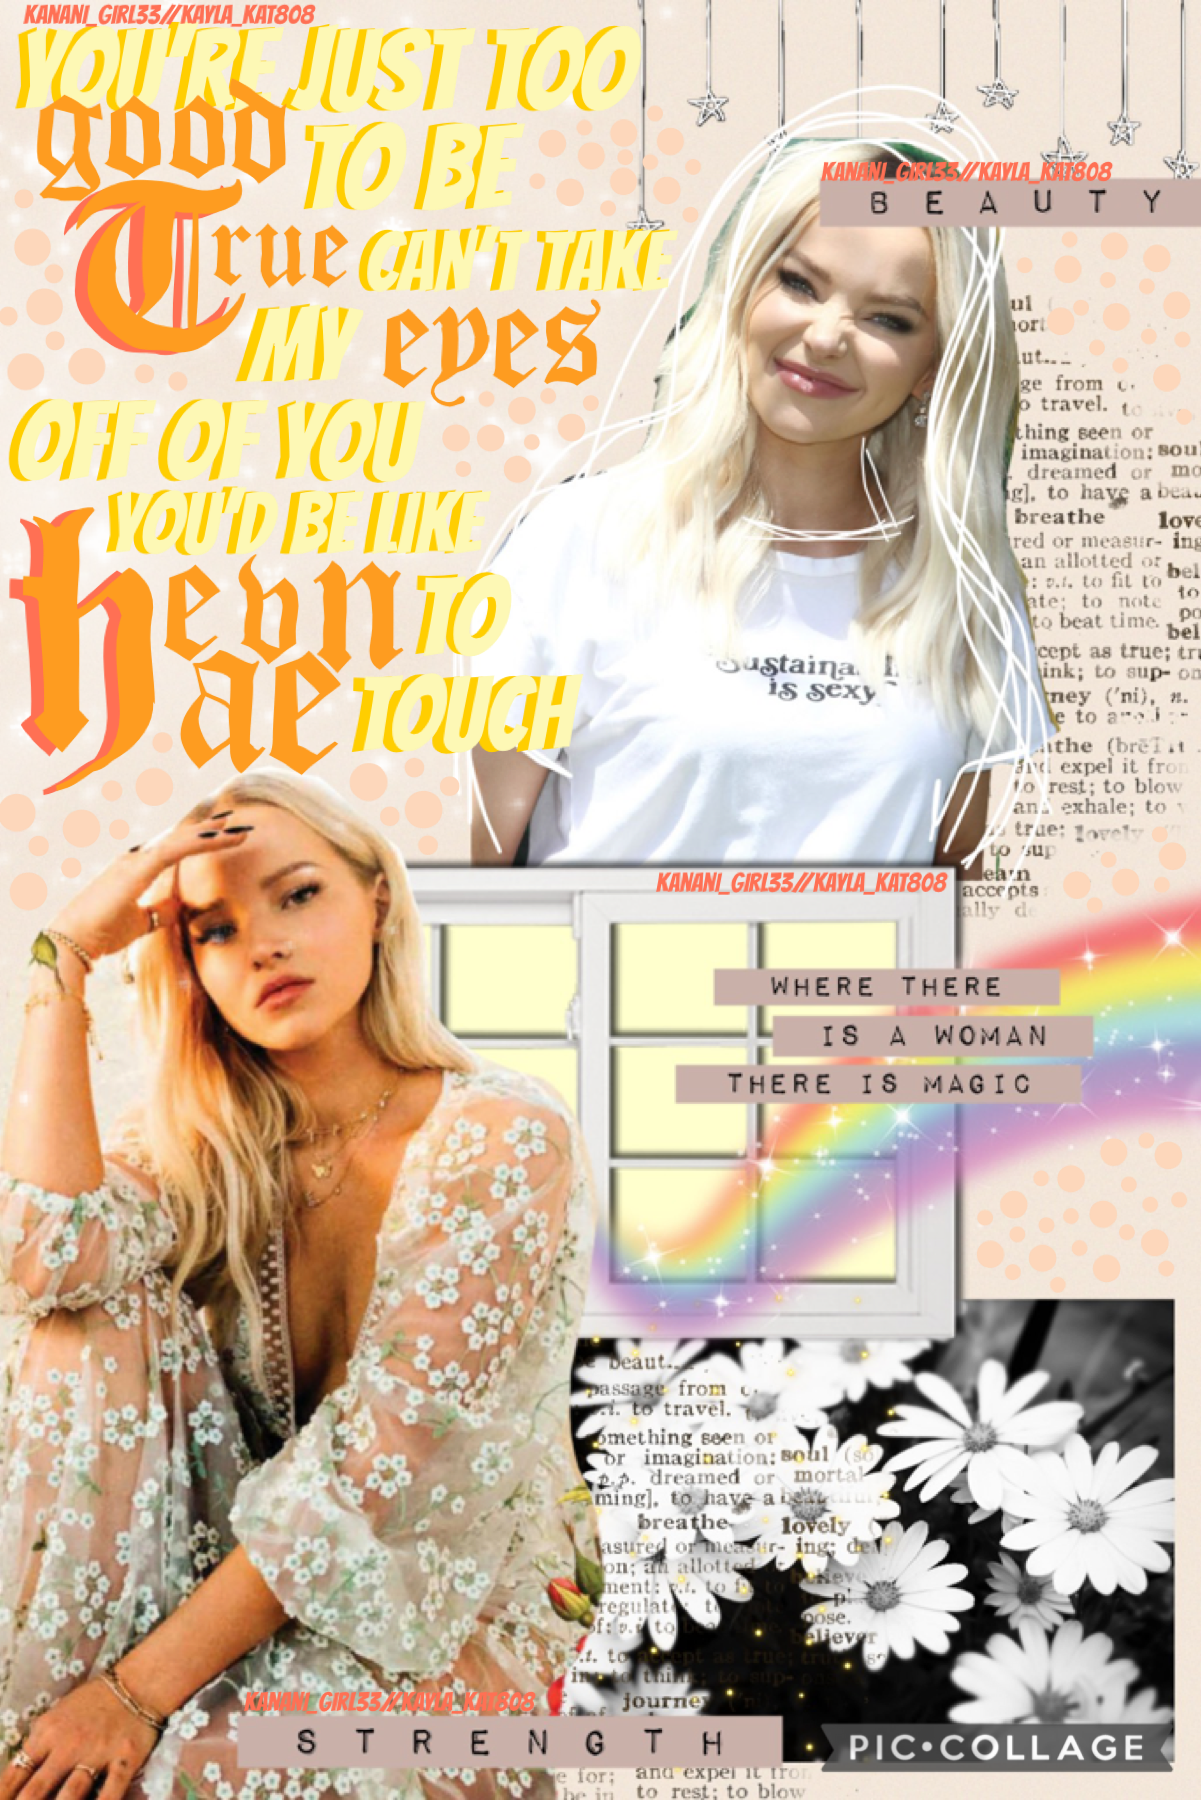 💛tap💛
march 25, 2021
hello everyone! dove cameron appreciation collage! i just found out she likes brownies and ranch together... what weird food combos do you like? 💛